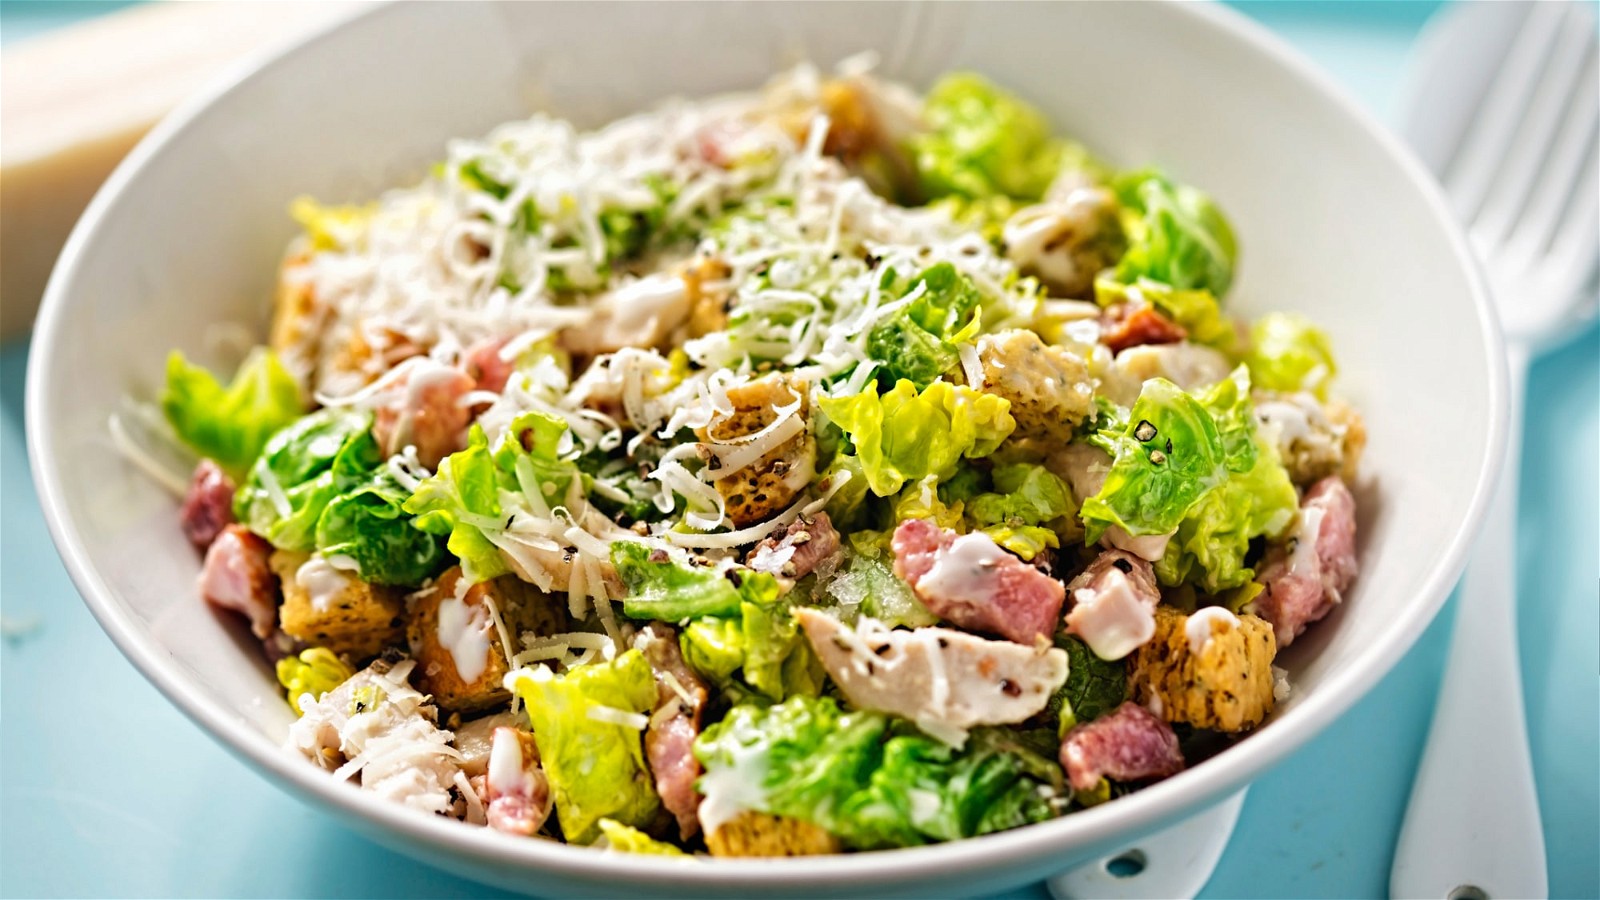 Image of Chopped Chicken Casaer Salad